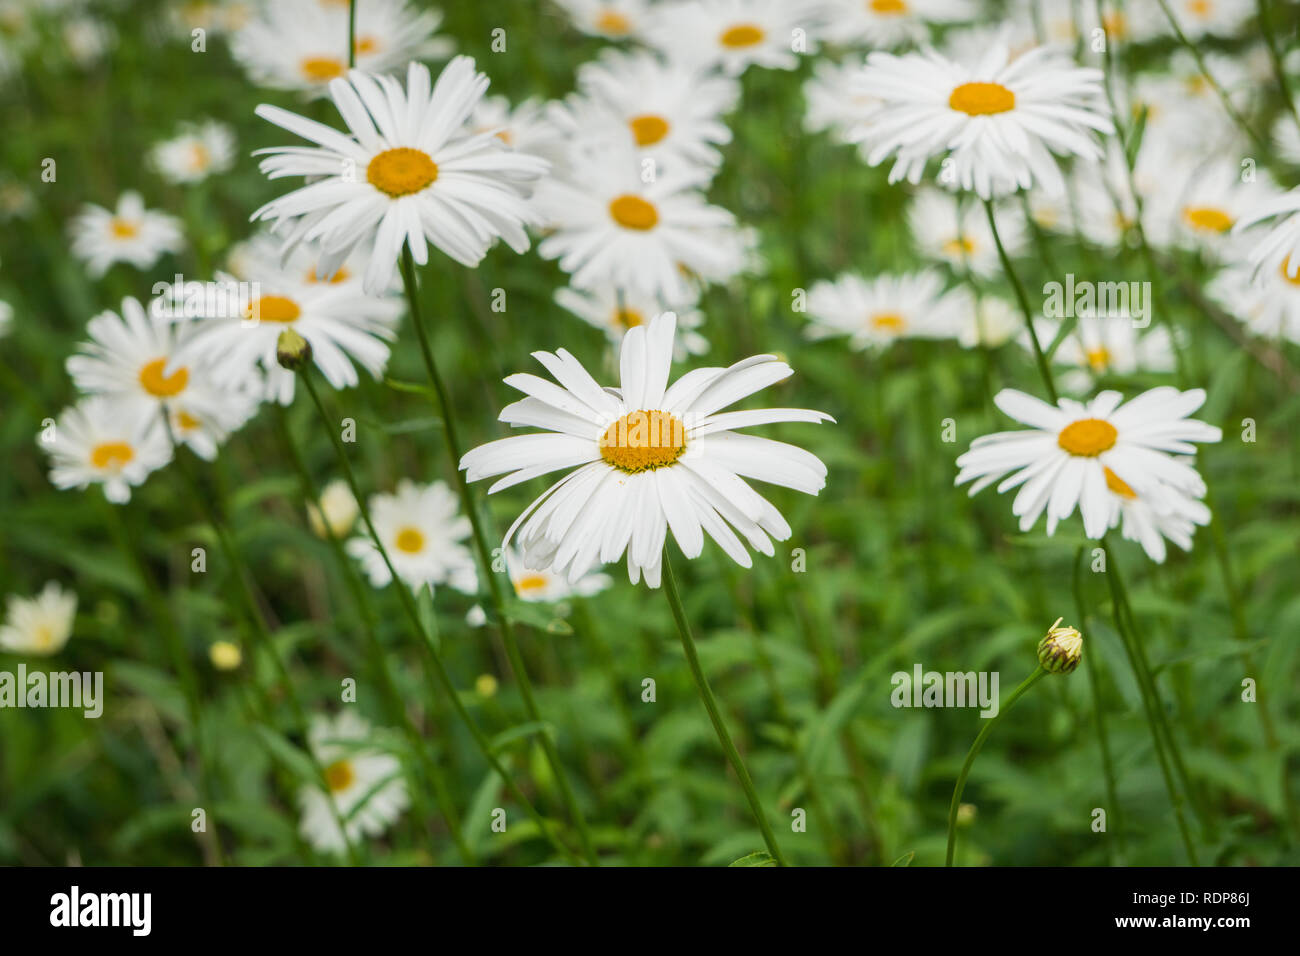 Daisy flowers blooming on a meadow Stock Photo